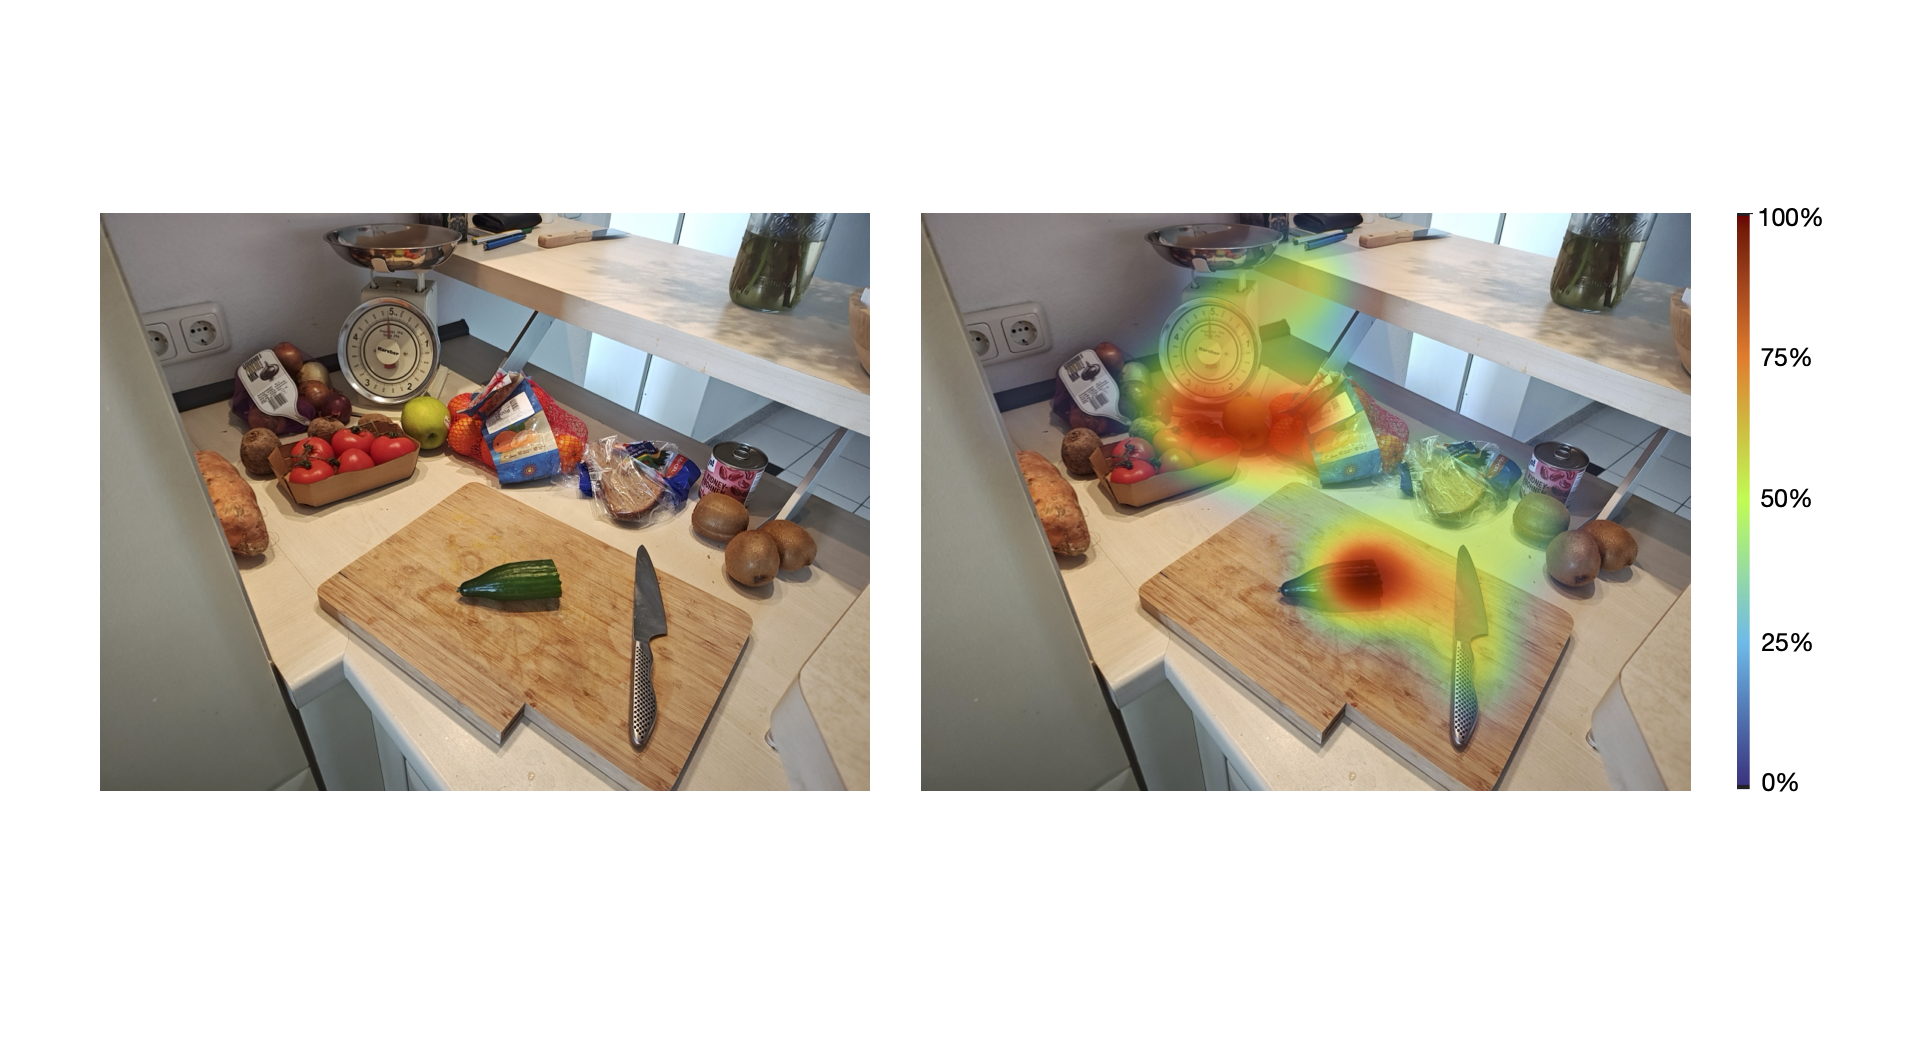 An example of a heatmap from Pupil Cloud. On the left is a photo of a kitchen countertop. On the right is the same photo with a gaze heatmap overlayed.